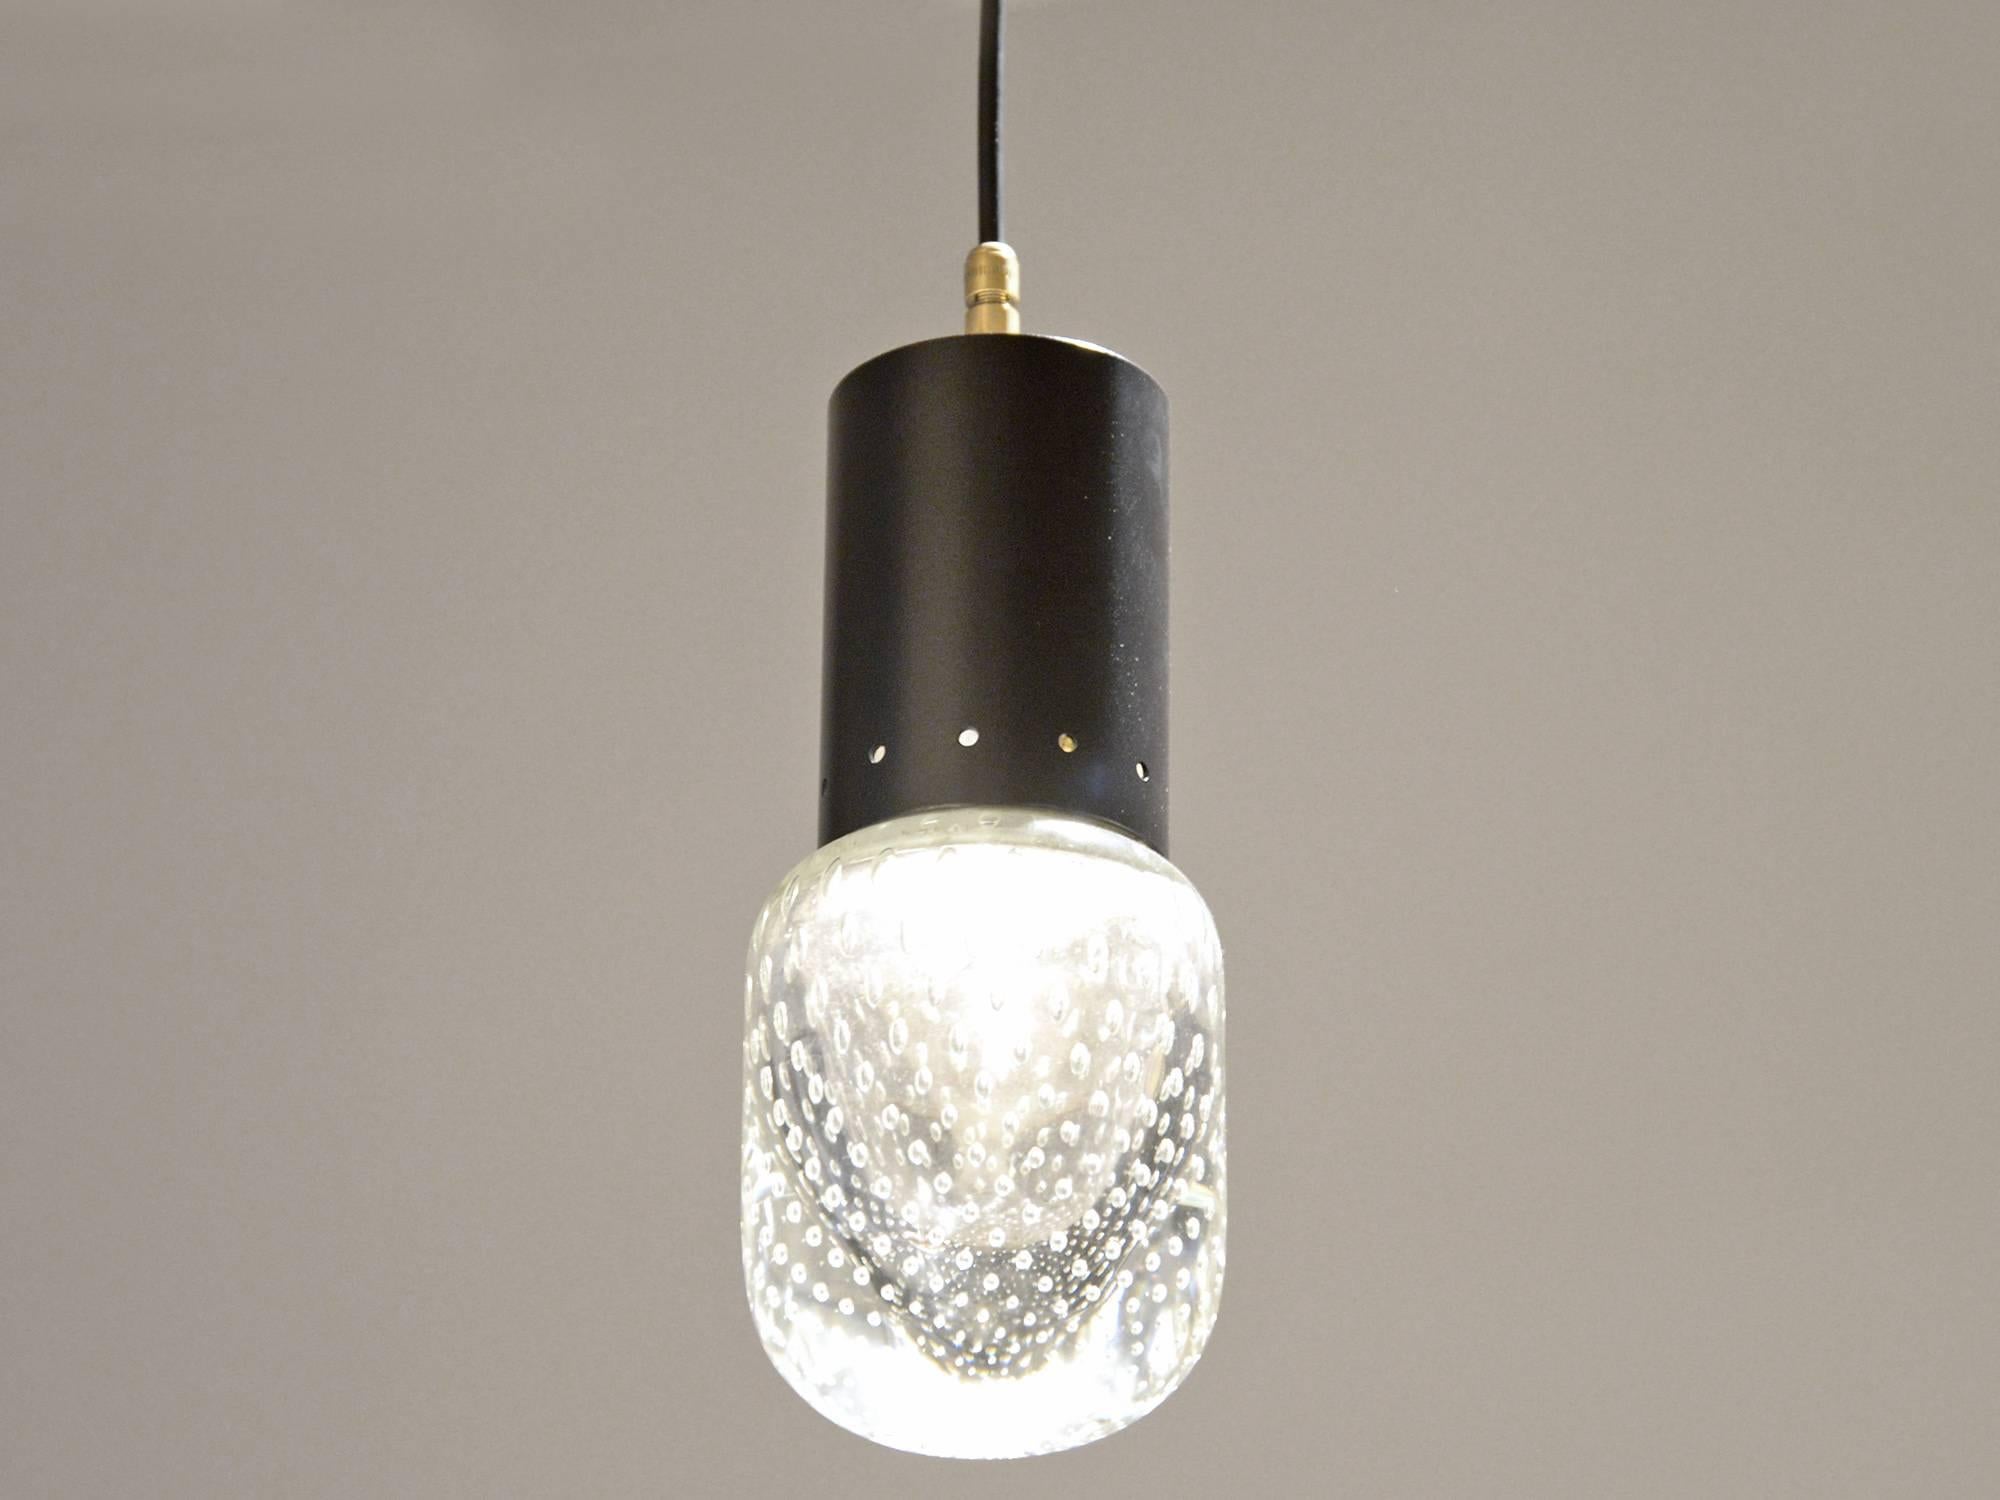 Gino Sarfatti
Pendant light
Bubbled glass, lacquered metal, rope
Made for Seguso.
Italy, circa 1950.
Measures: H 95 x D 6 cm.